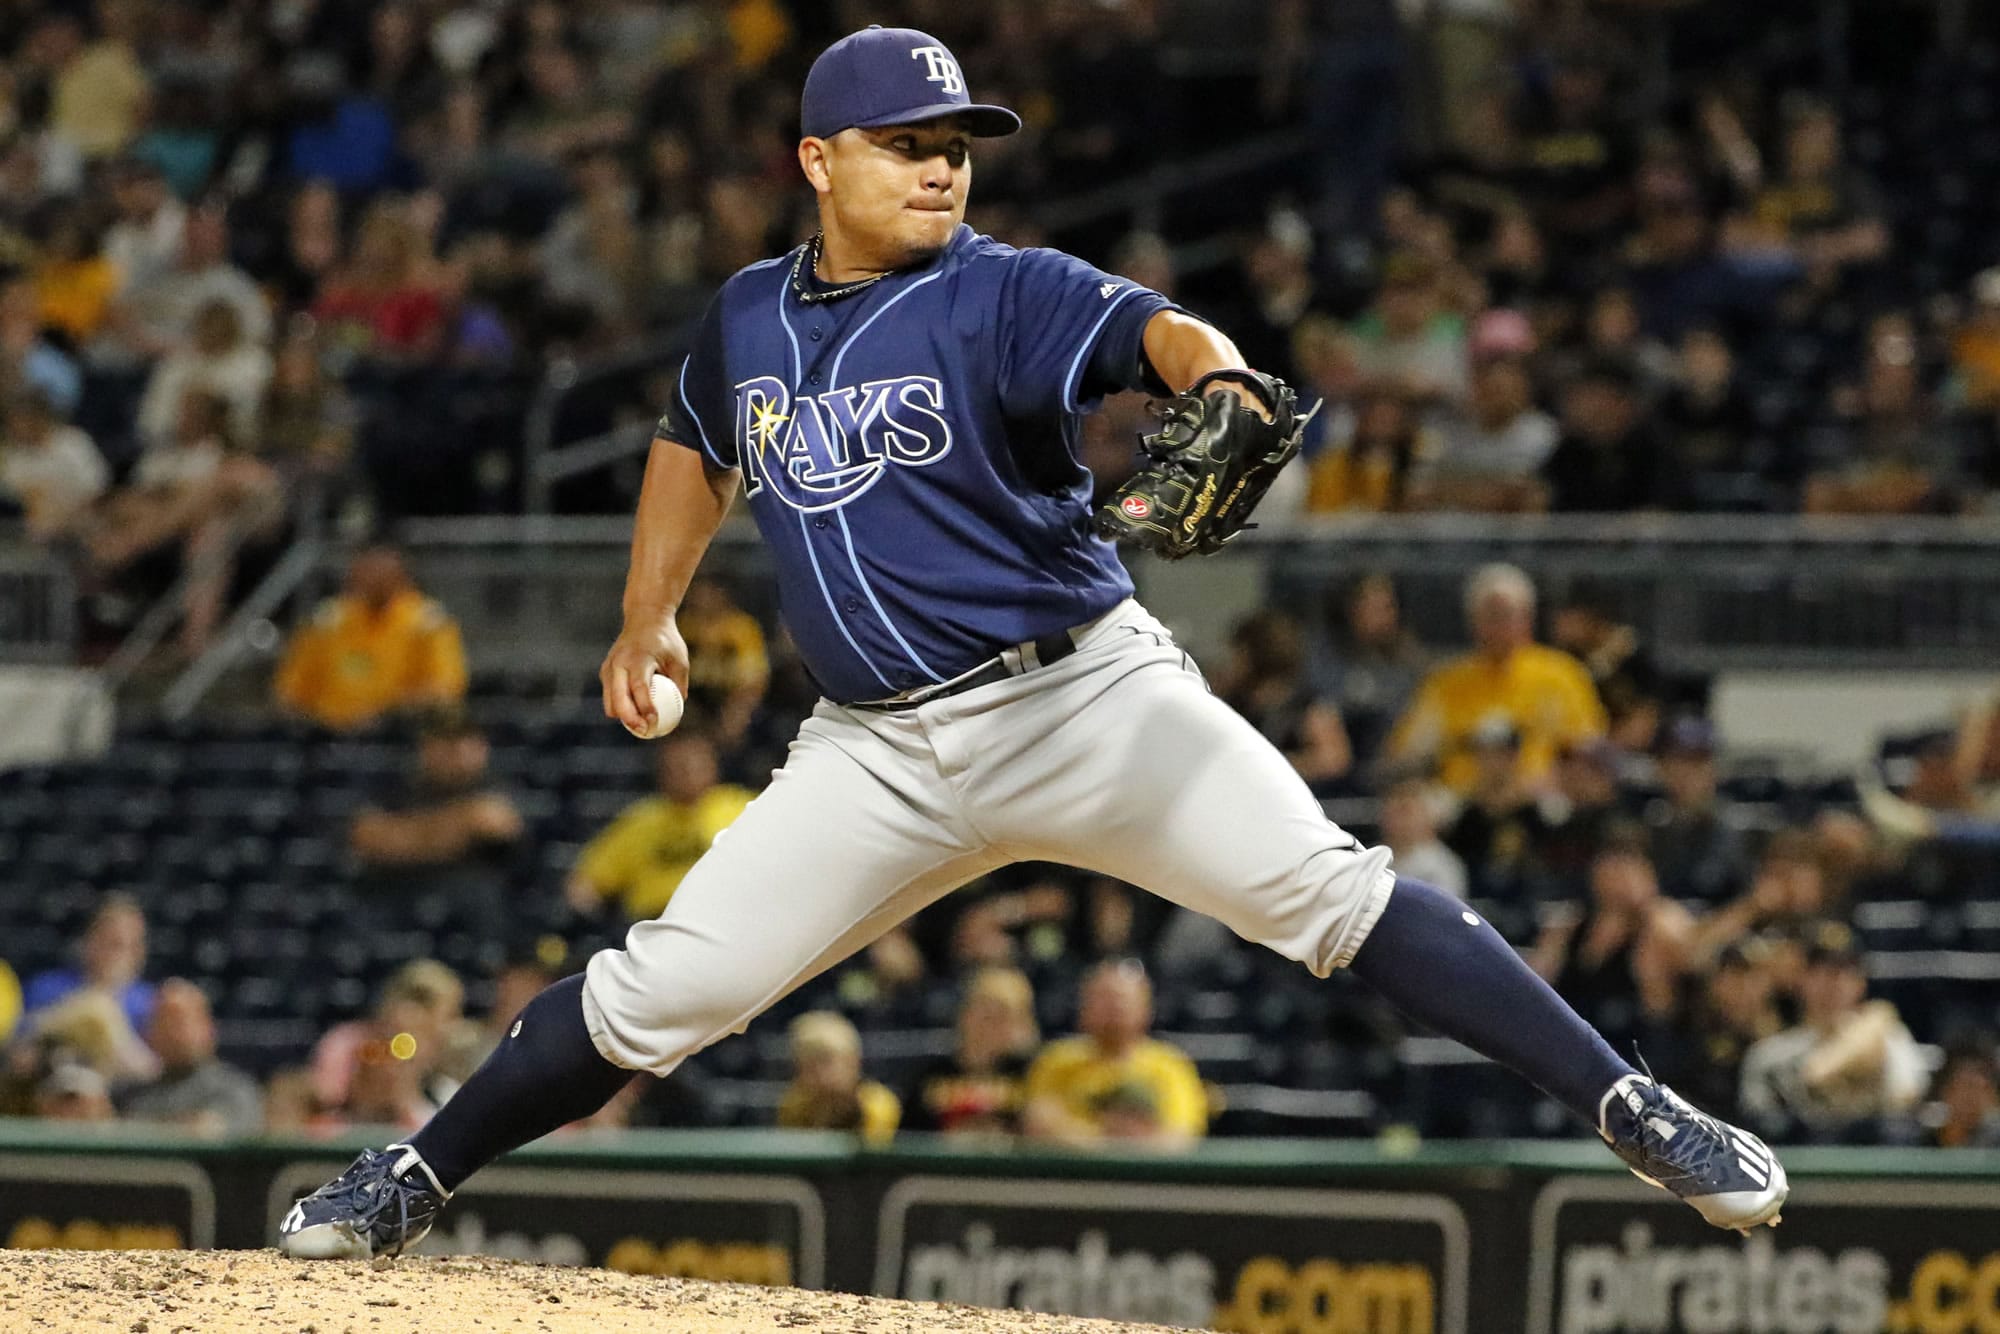 Tampa Bay Rays relief pitcher Erasmo Ramirez was traded to the Seattle Mariners, July 28, 2017, for reliever Steve Cishek. (AP Photo/Gene J.